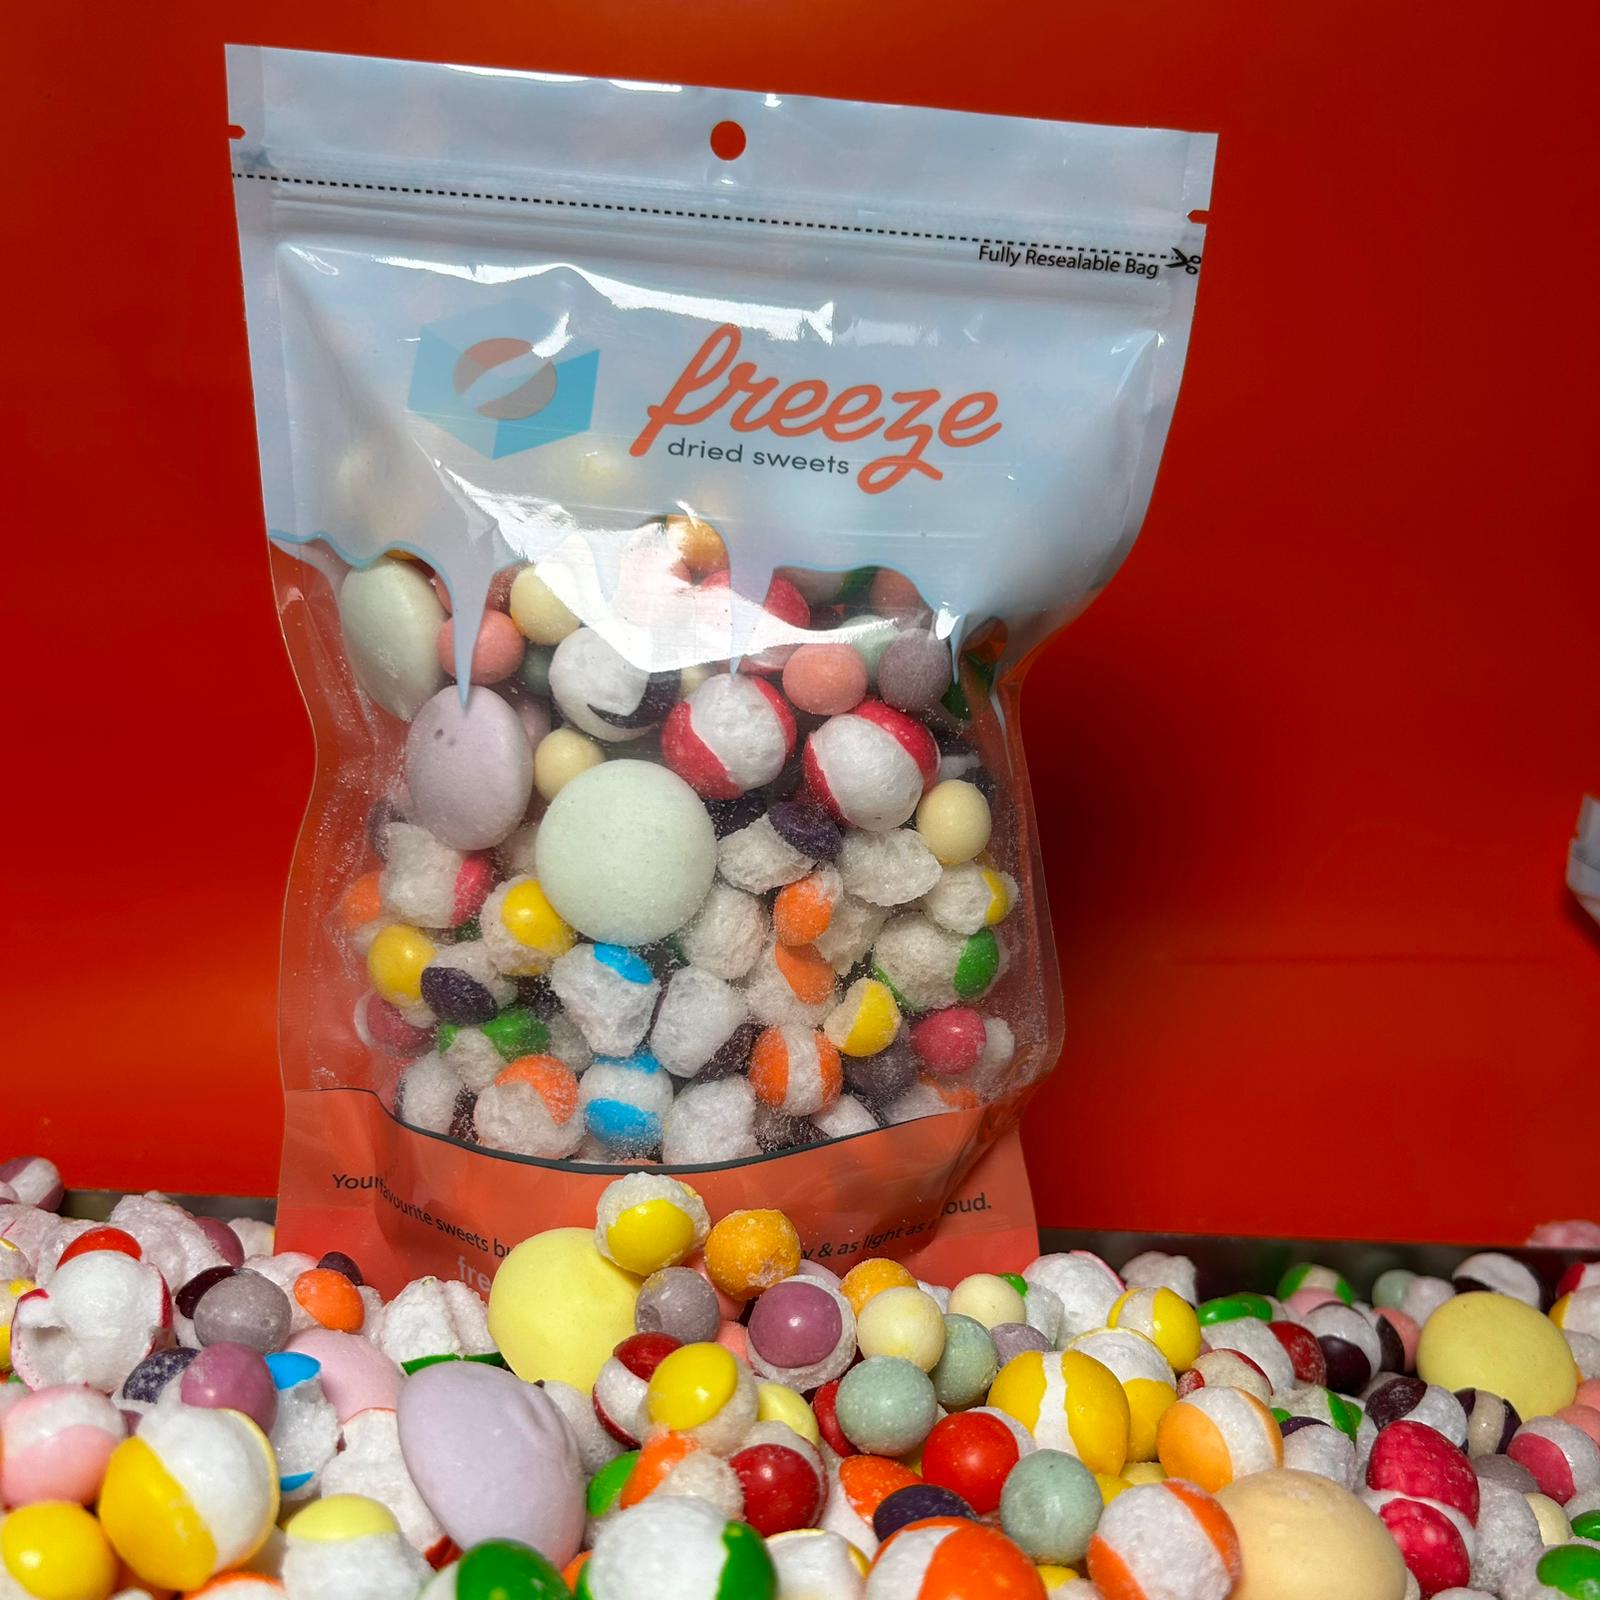 Skittles Mix 50g - Freeze Dried Sweets